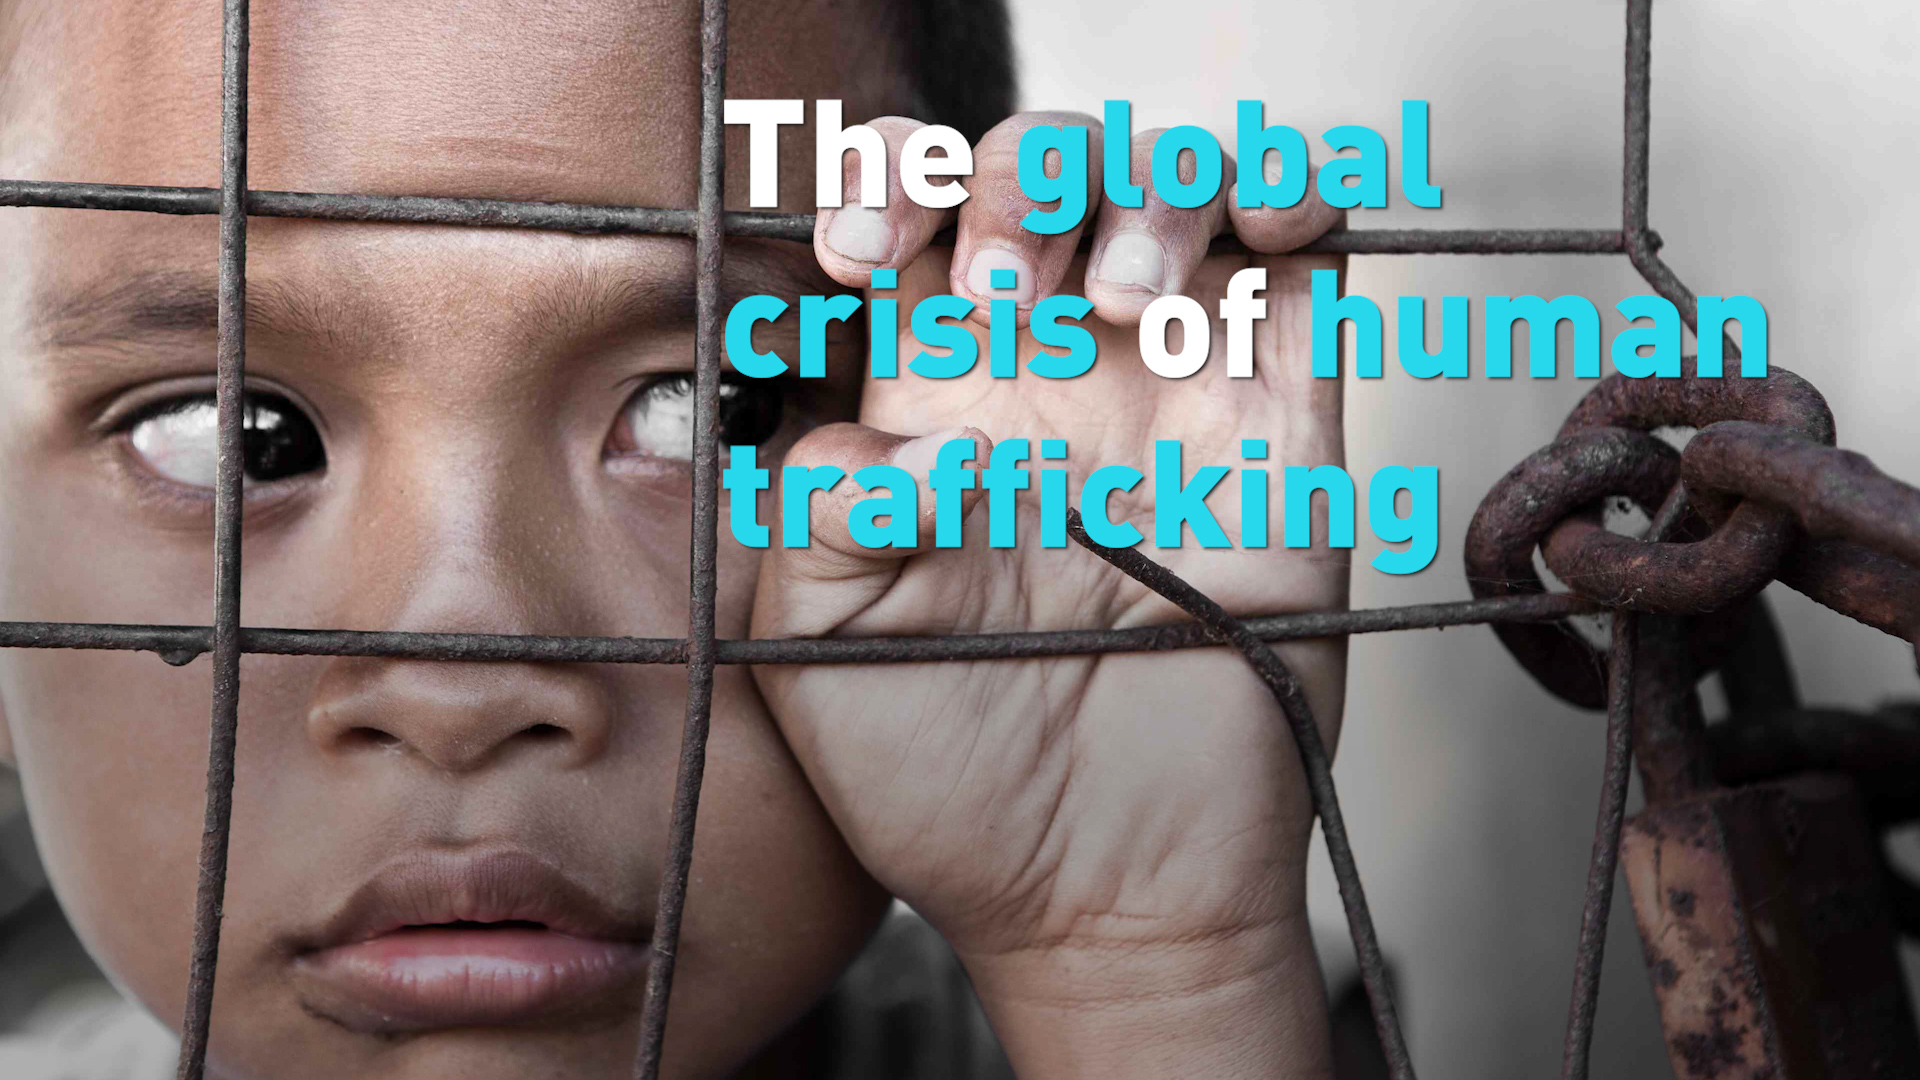 What Are The Examples Of Human Trafficking Your